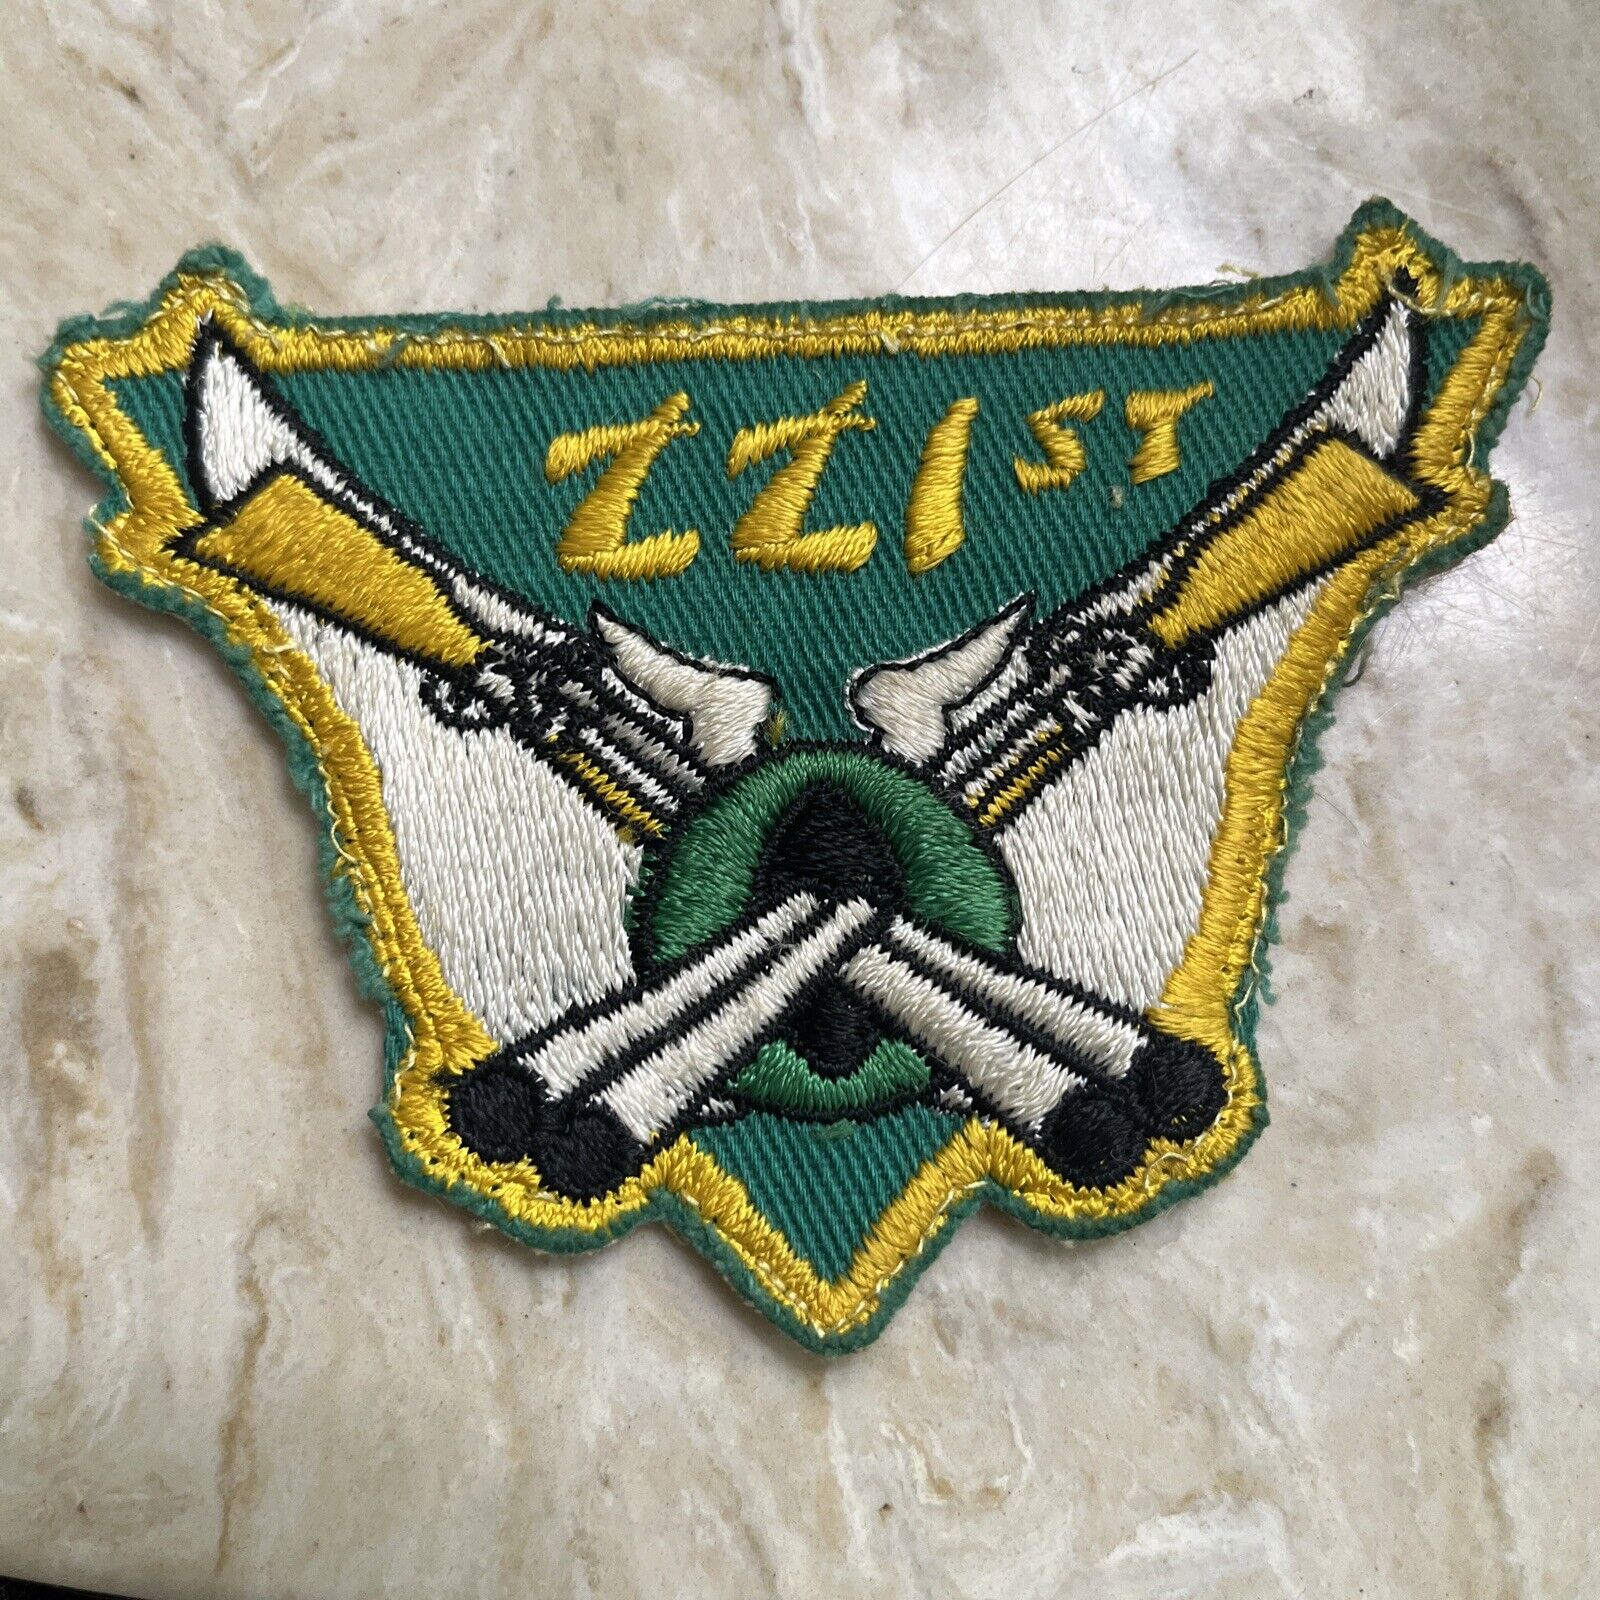 Guaranteed Original Vietnam War 221st Aviation Avn Co Twill Helicopter Patch